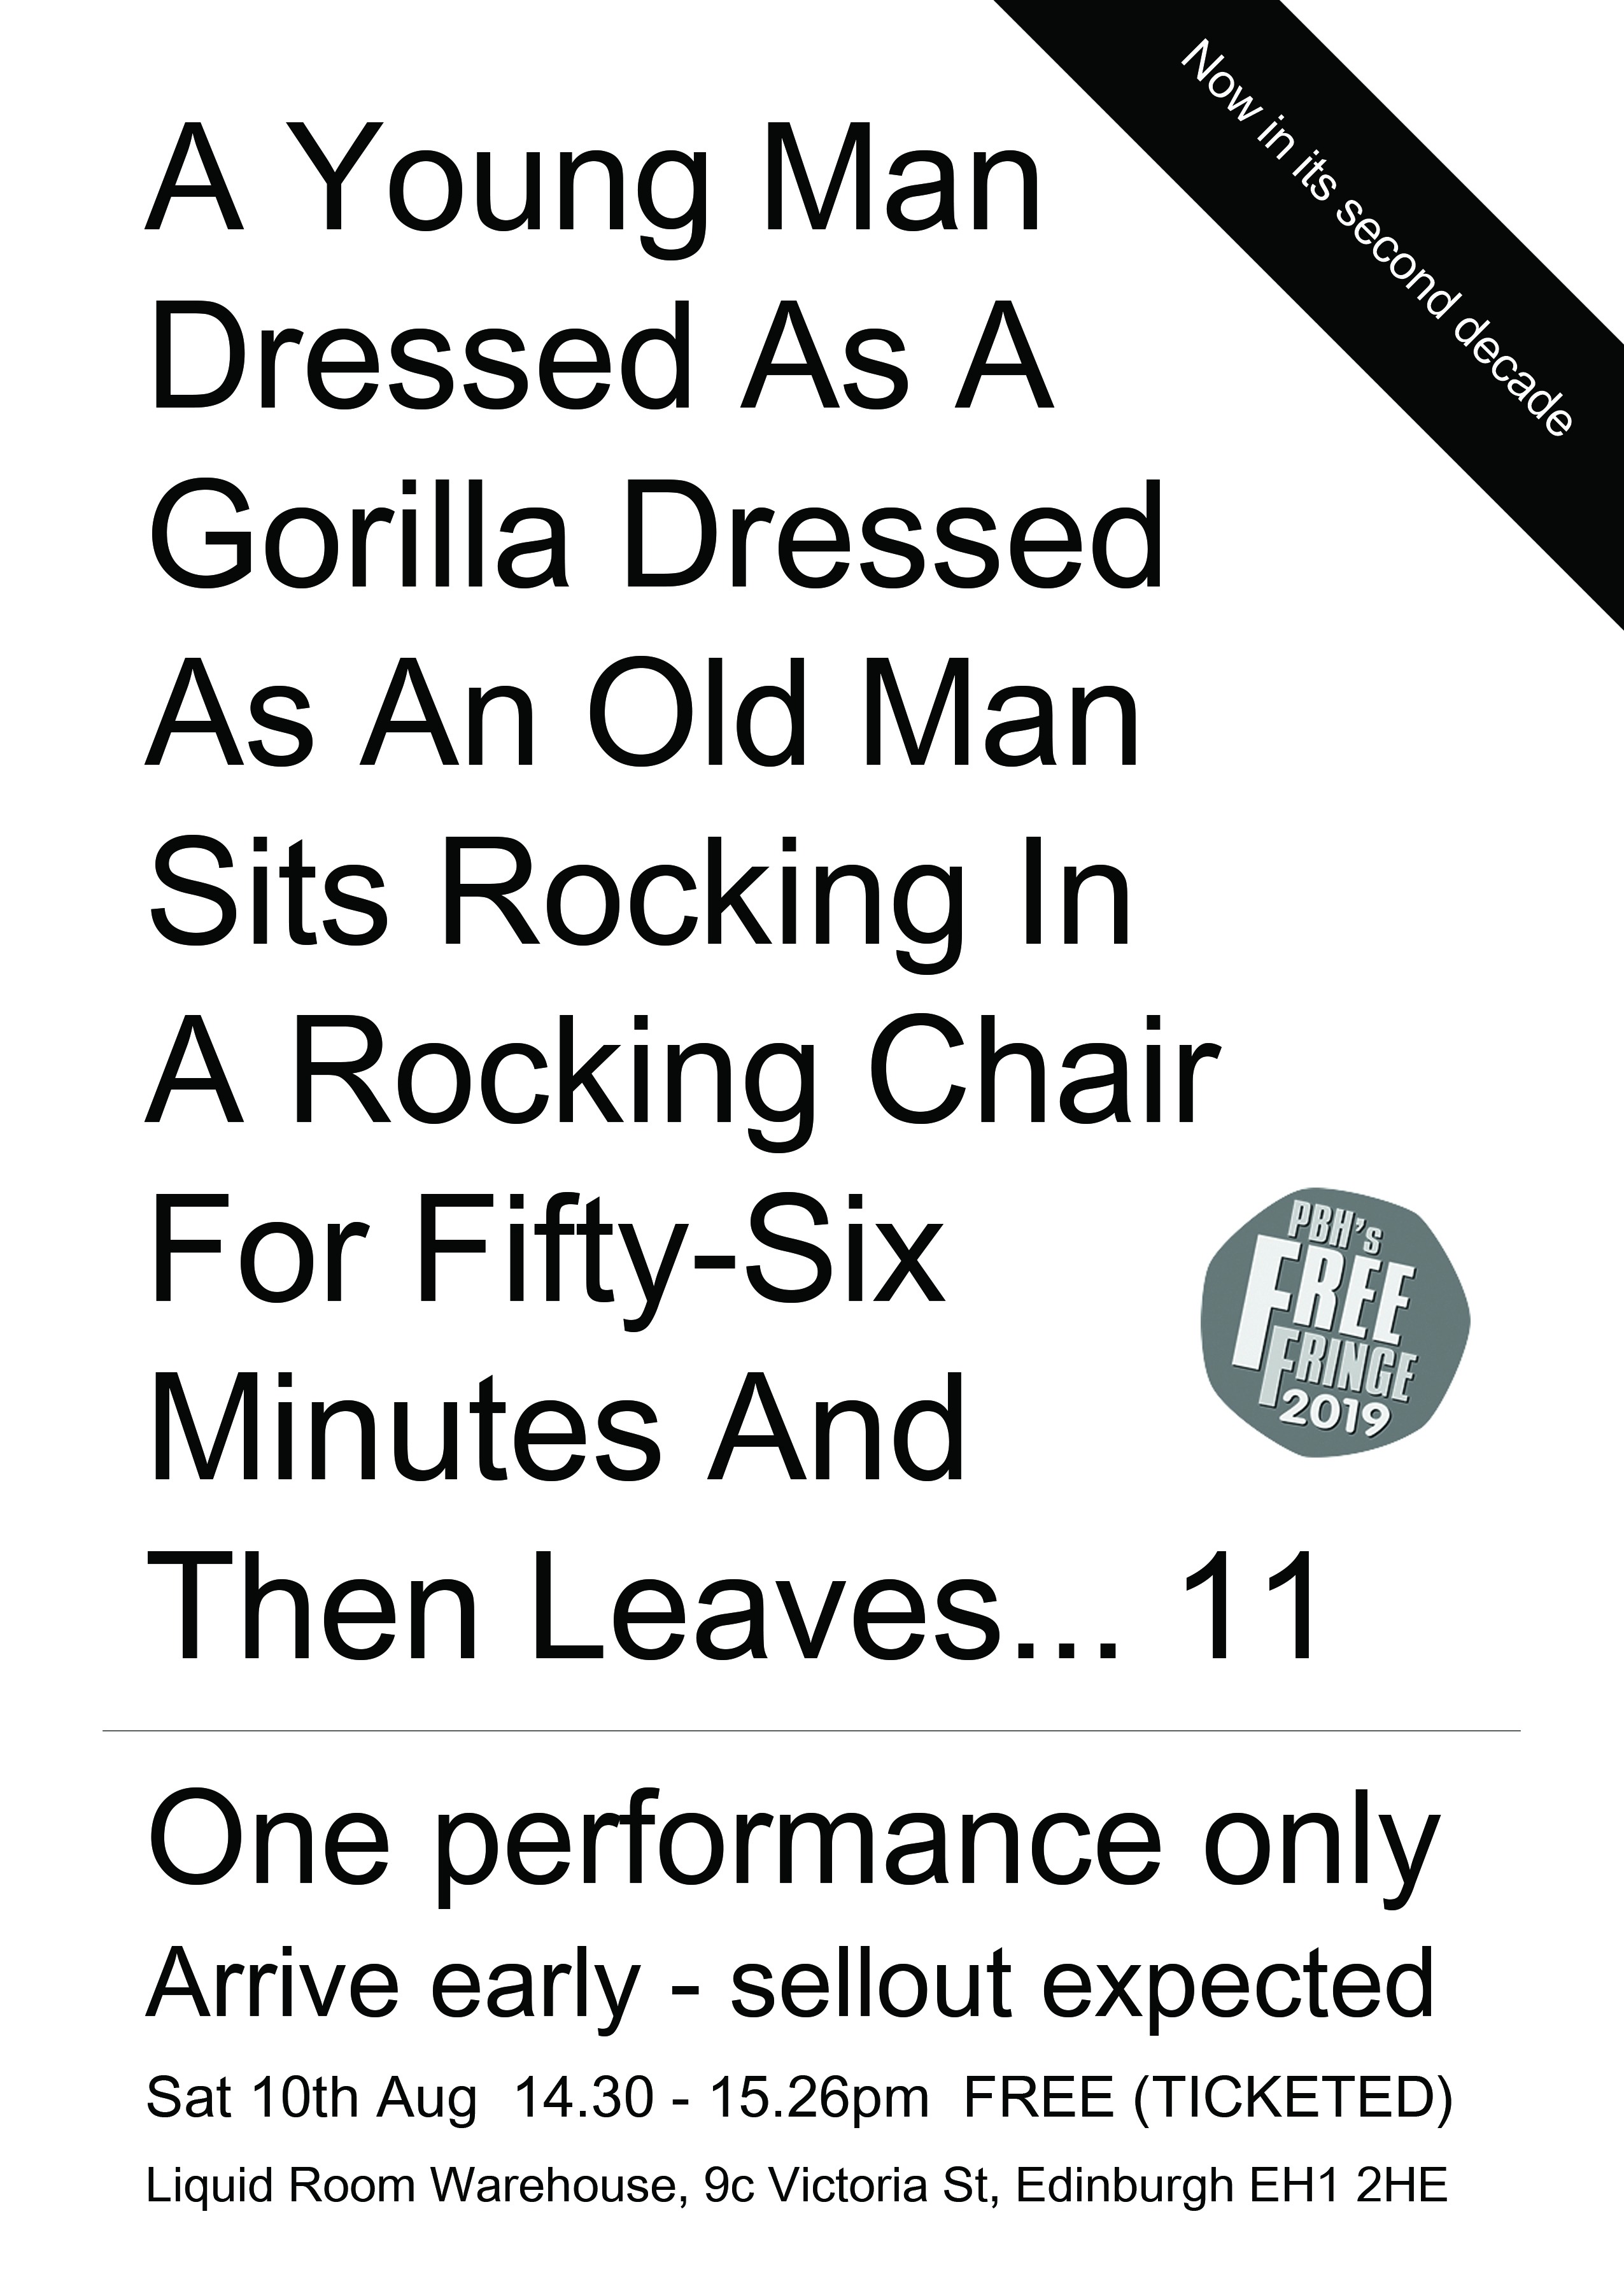 The poster for A Young Man Dressed As A Gorilla Dressed As An Old Man Sits Rocking In A Rocking Chair For 56 Minutes And Then Leaves... 11